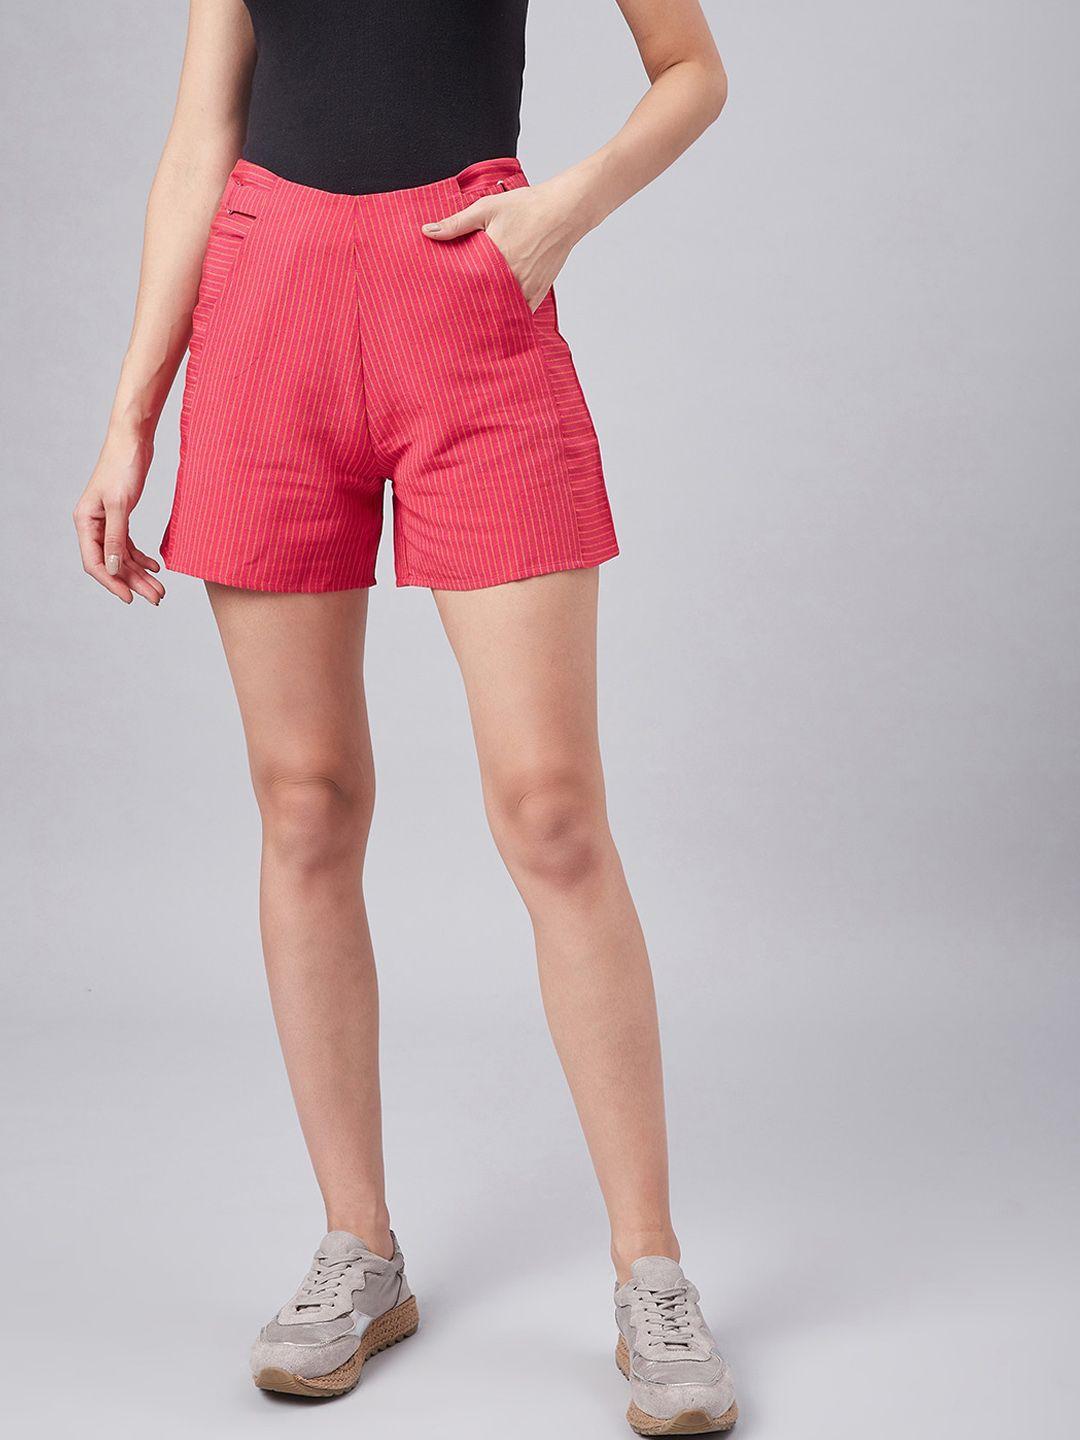 marie claire women red striped regular fit regular shorts